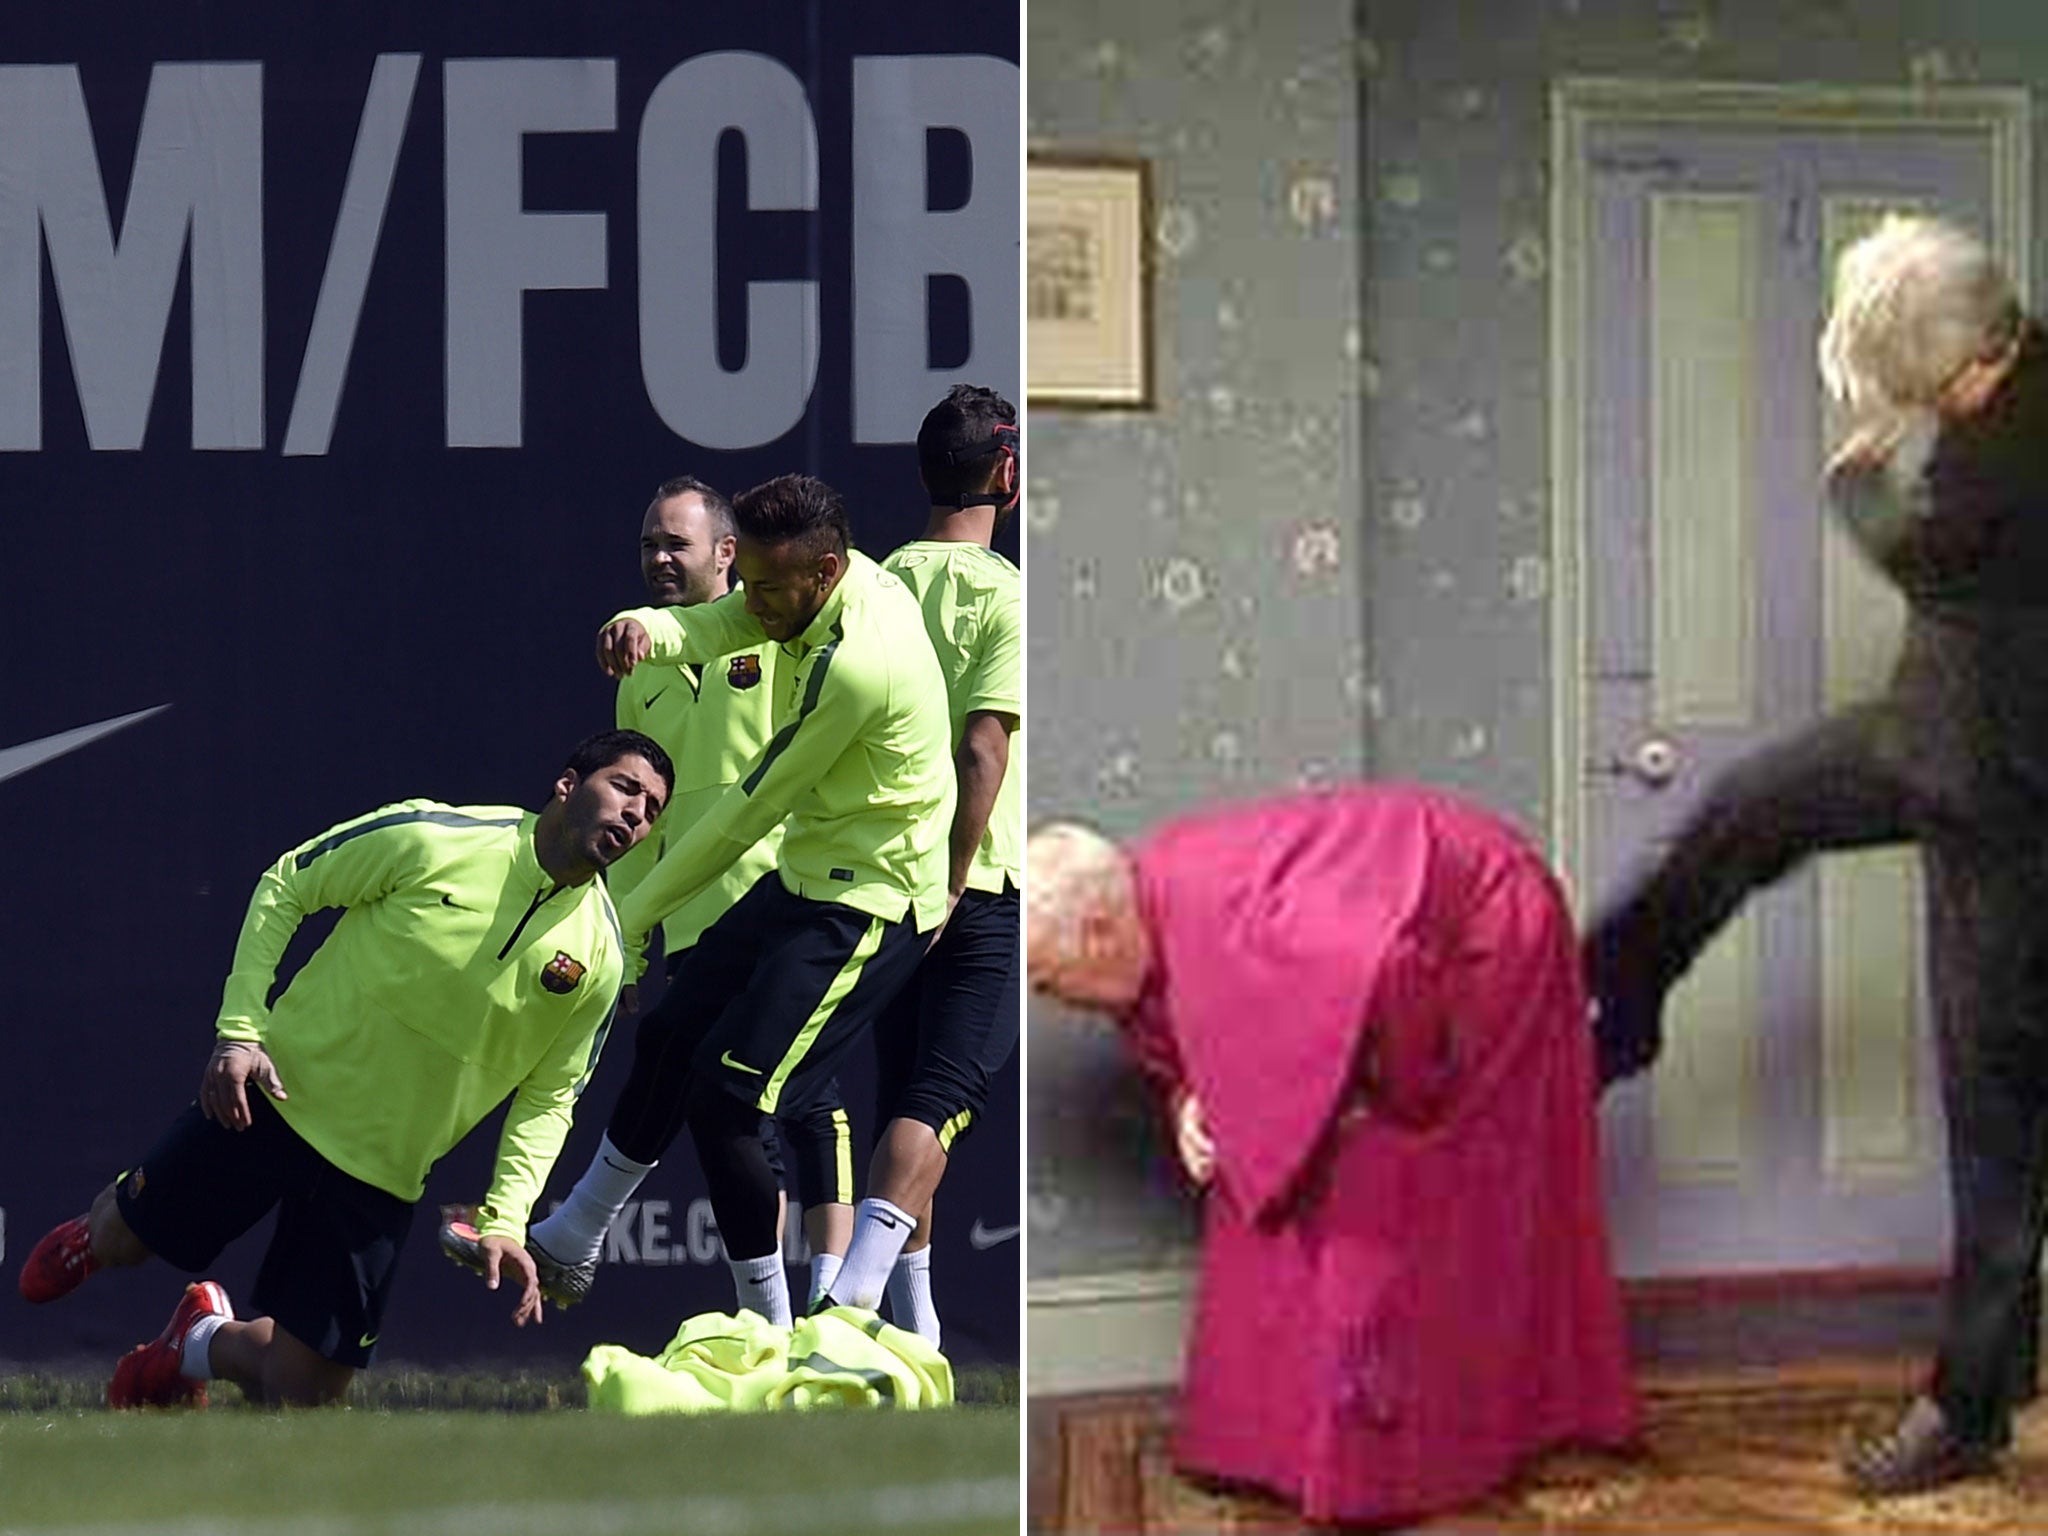 Neymar boots Luis Suarez in a moment compared to the famous Father Ted scene involving Bishop Brennan